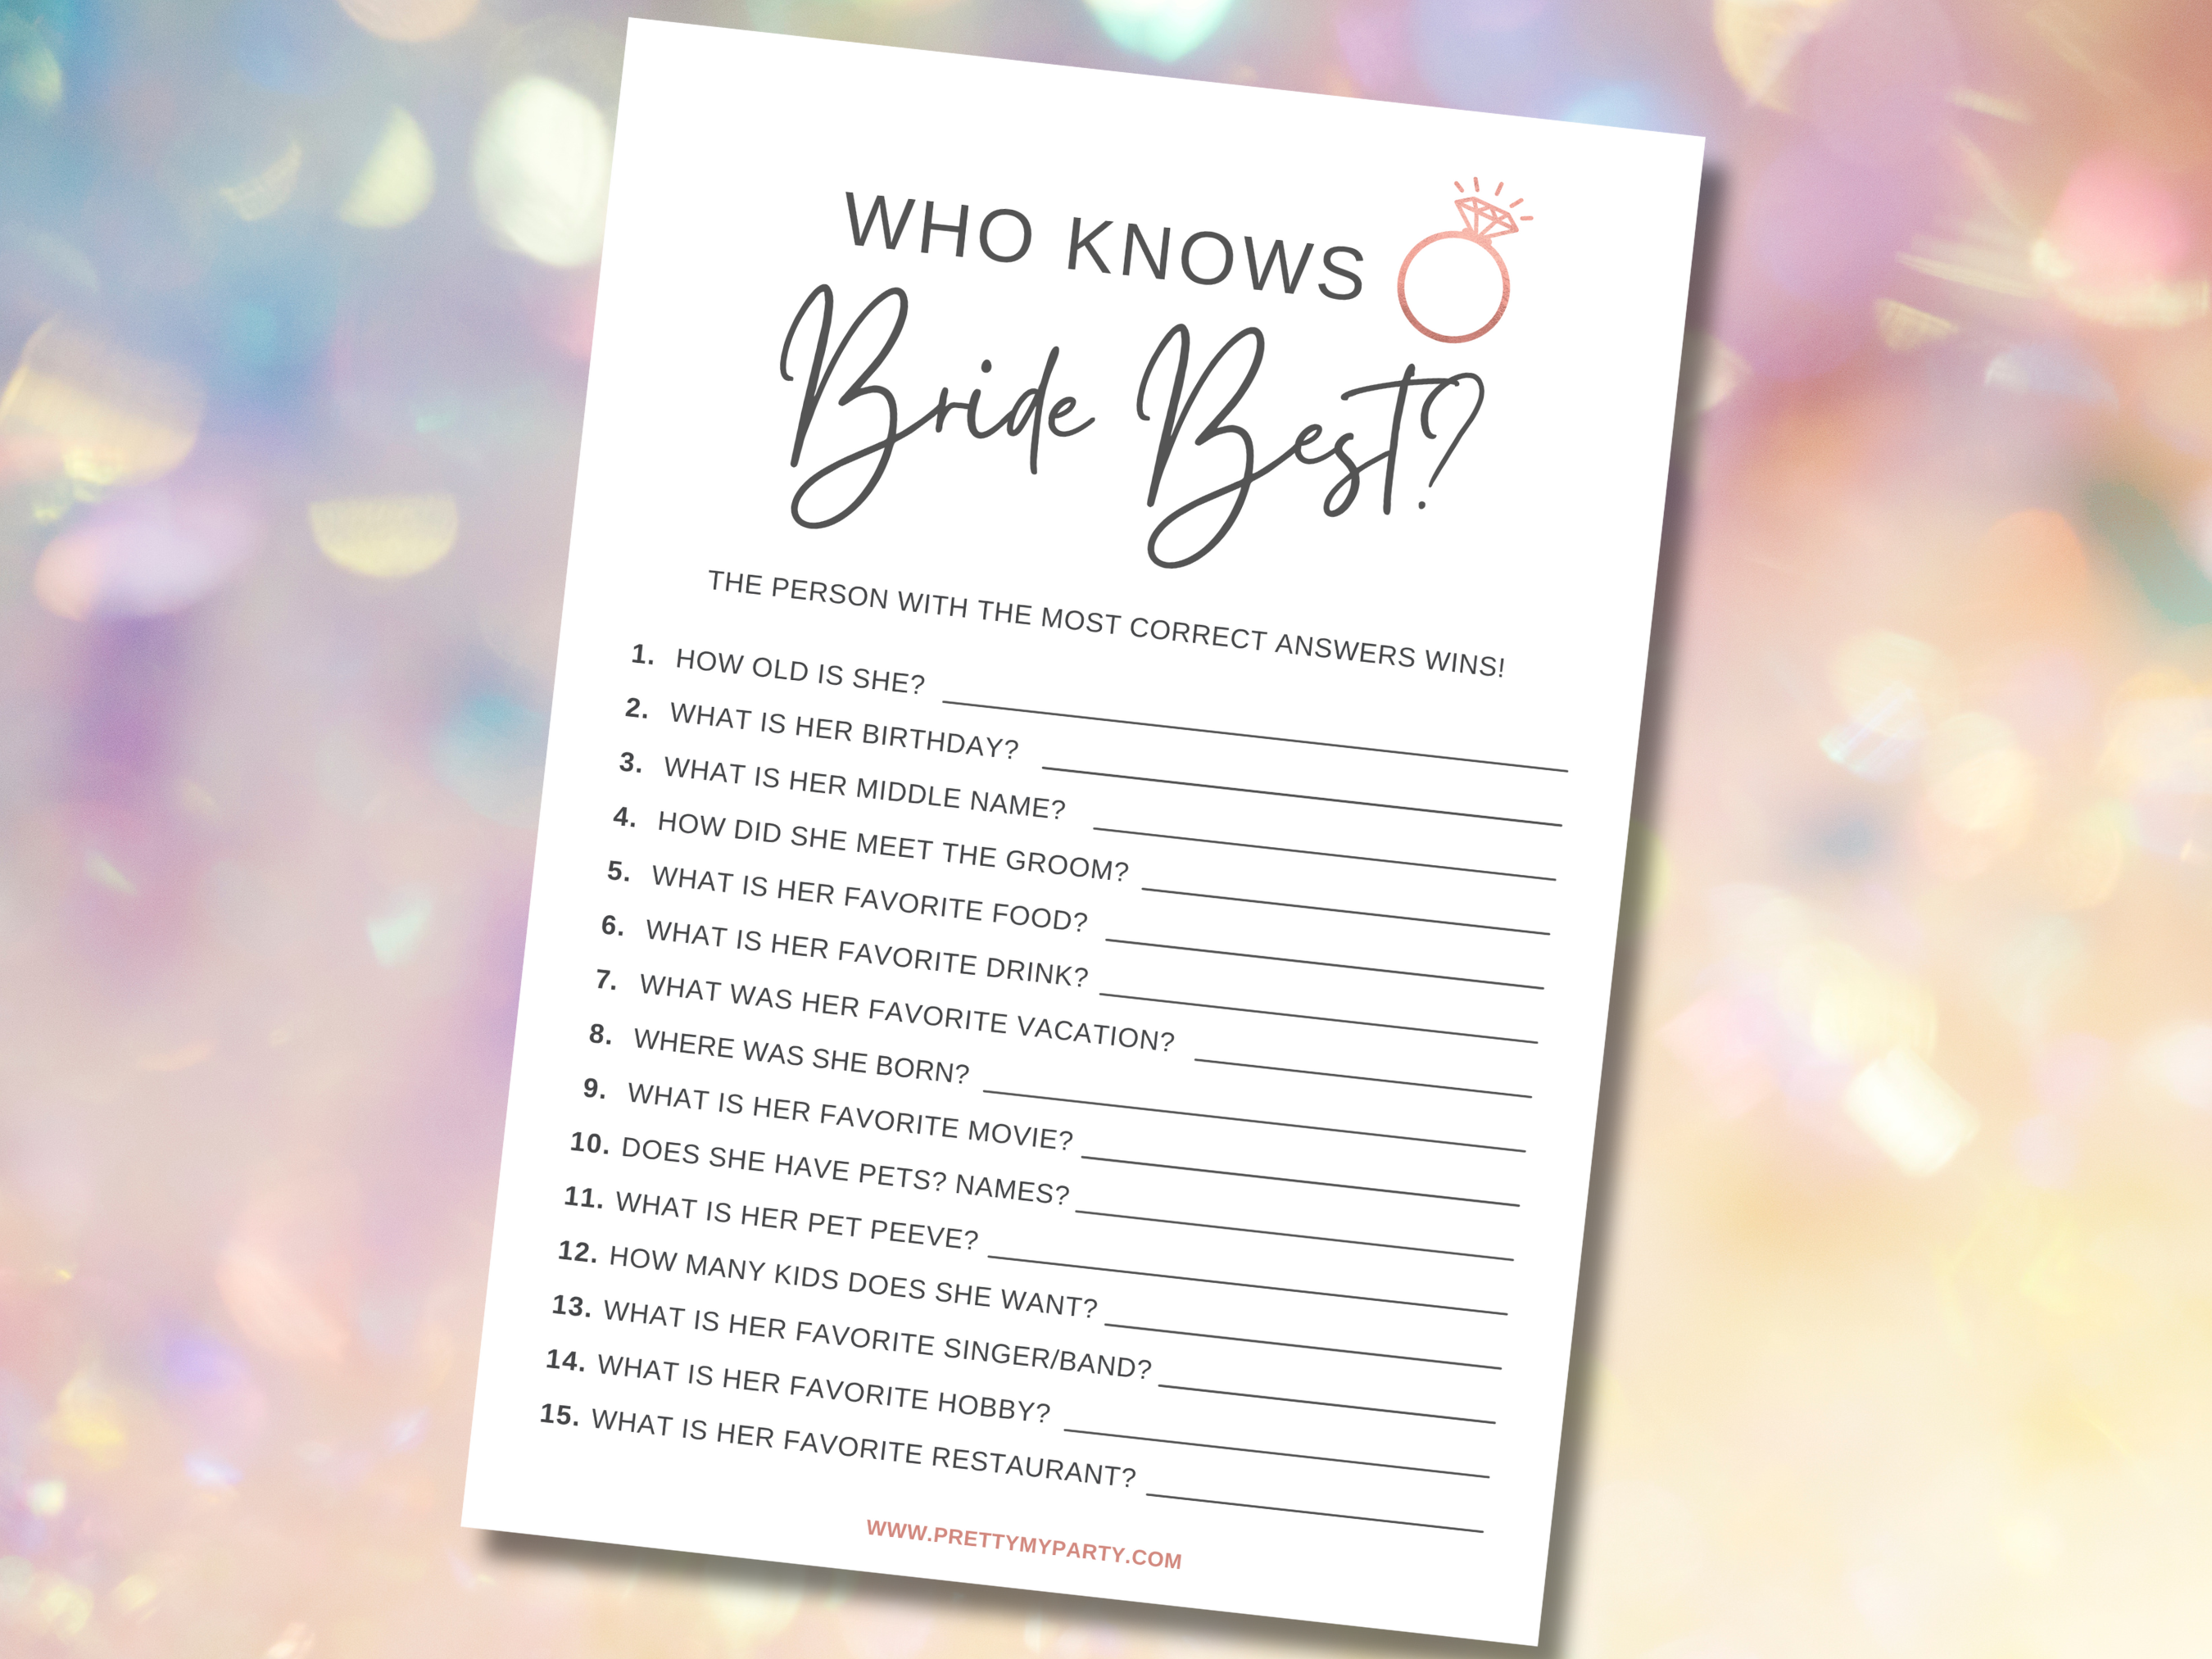 Who Knows The Bride Best (Free Printable Game)